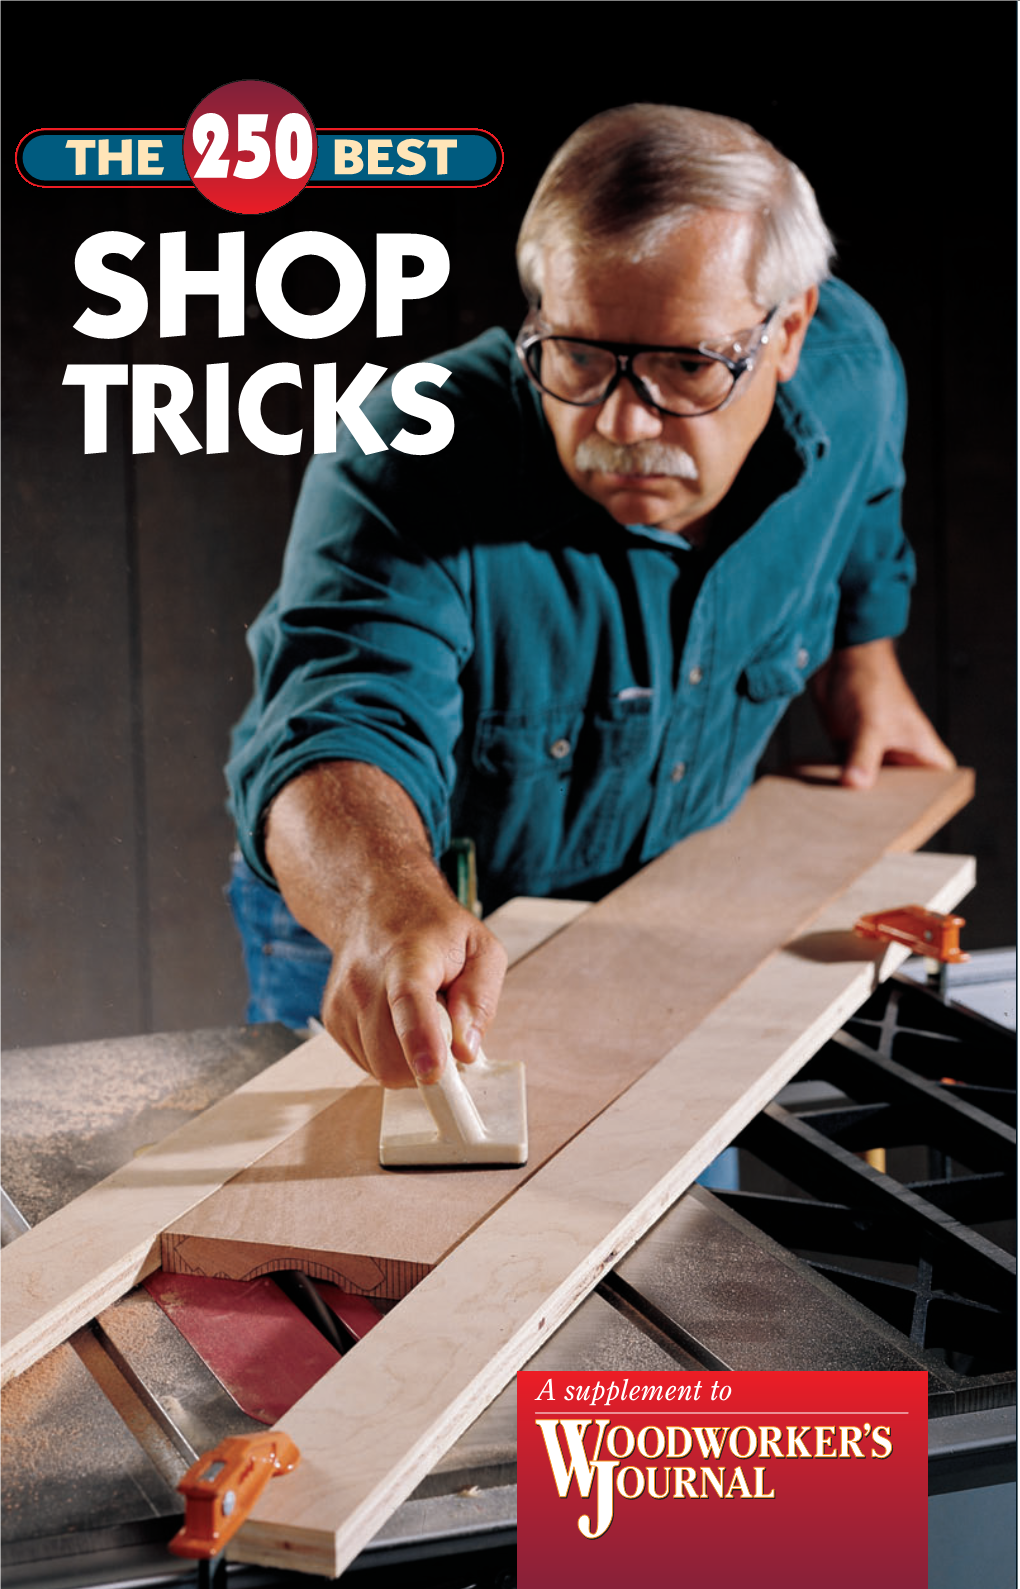 SHOP TRICKS from WOODWORKER's JOURNAL TRICKS Across the Country Have Been Sharing Their Favorite Shortcuts, Jigs and Fixtures with the Editors of Woodworker’S Journal